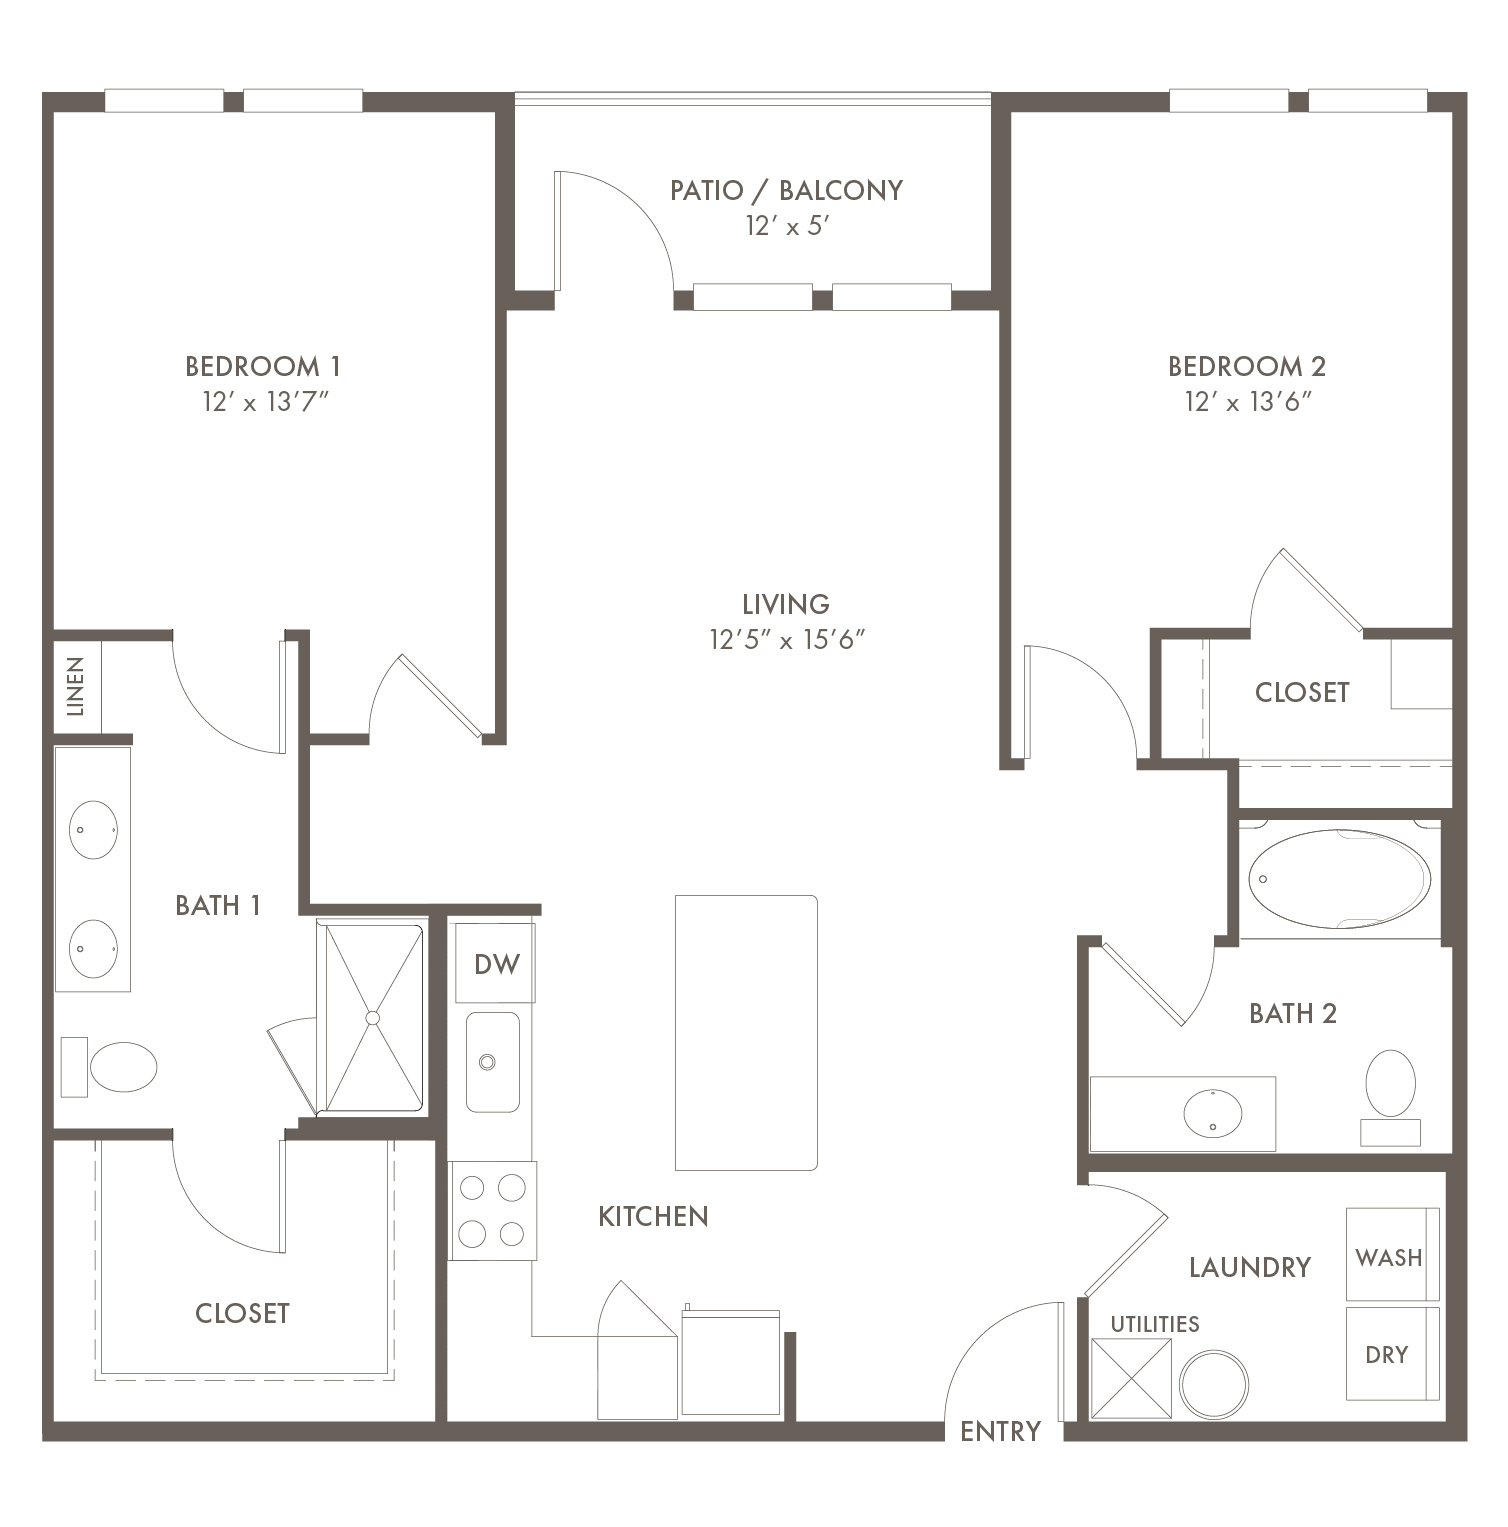 A B1 unit with 2 Bedrooms and 2 Bathrooms with area of 1164 sq. ft